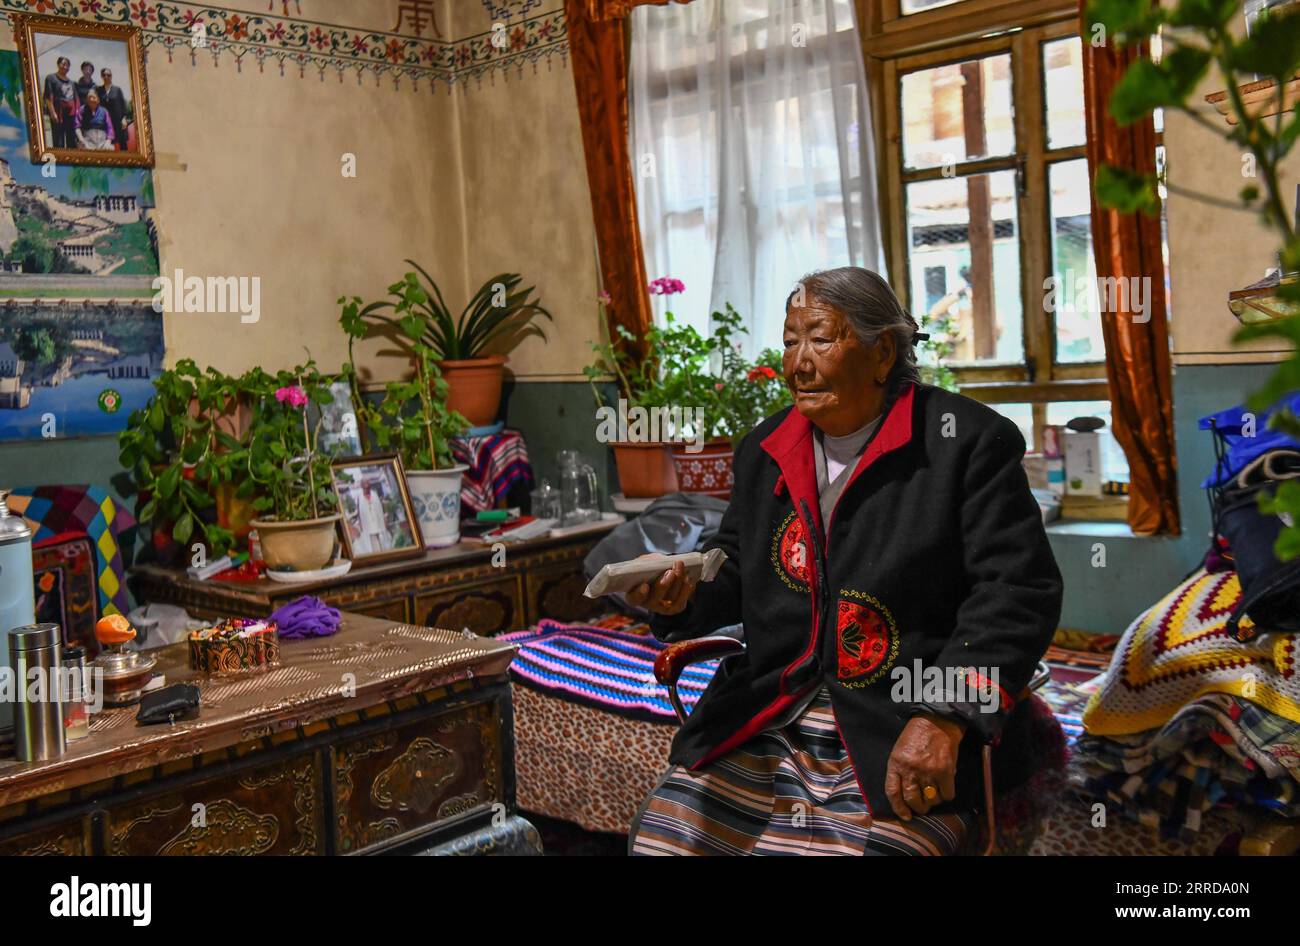 211213 -- LHASA, Dec. 13, 2021 -- Migmar Tsamjo watches TV at her house in Lhasa, southwest China s Tibet Autonomous Region, Dec. 7, 2021. Migmar Tsamjo was born in 1933. She herded cattle for the serf owner and lived a miserable life in childhood. She fled from the serf owner in 1955, and was later rescued by the People s Liberation Army. She then was sent to Chengdu in southwest China s Sichuan Province and began to study at a college. In 1959, democratic reform was launched and feudal serfdom was finally abolished in Tibet. A million serfs and slaves were emancipated. Recalling bitter days Stock Photo